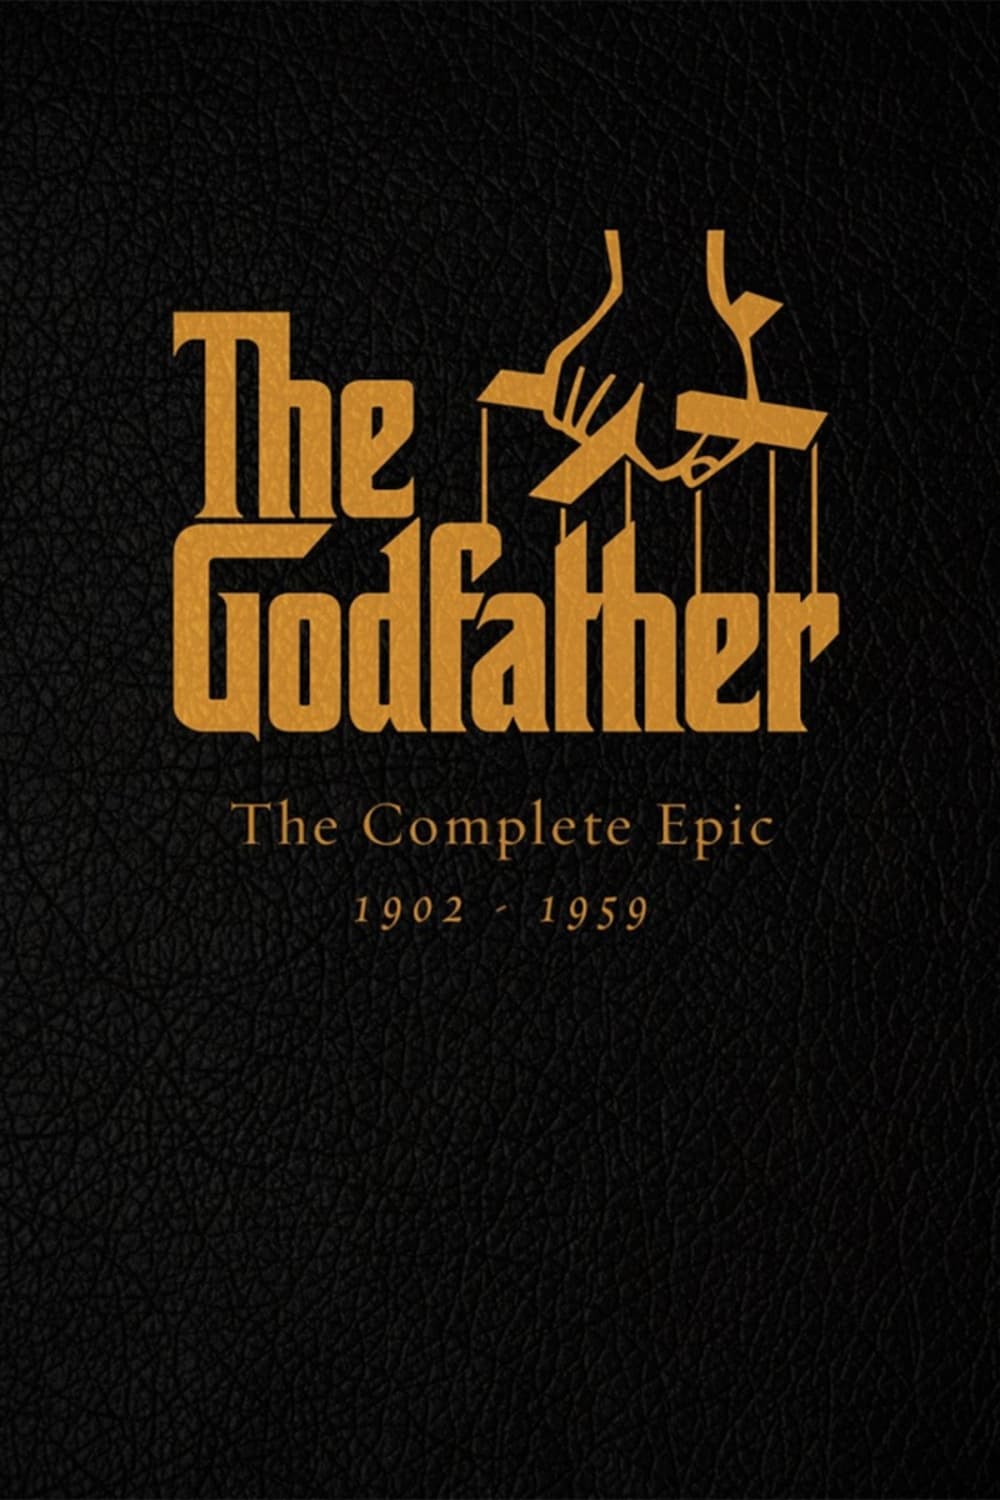 Mario Puzo's The Godfather: The Complete Novel for Television (1977)